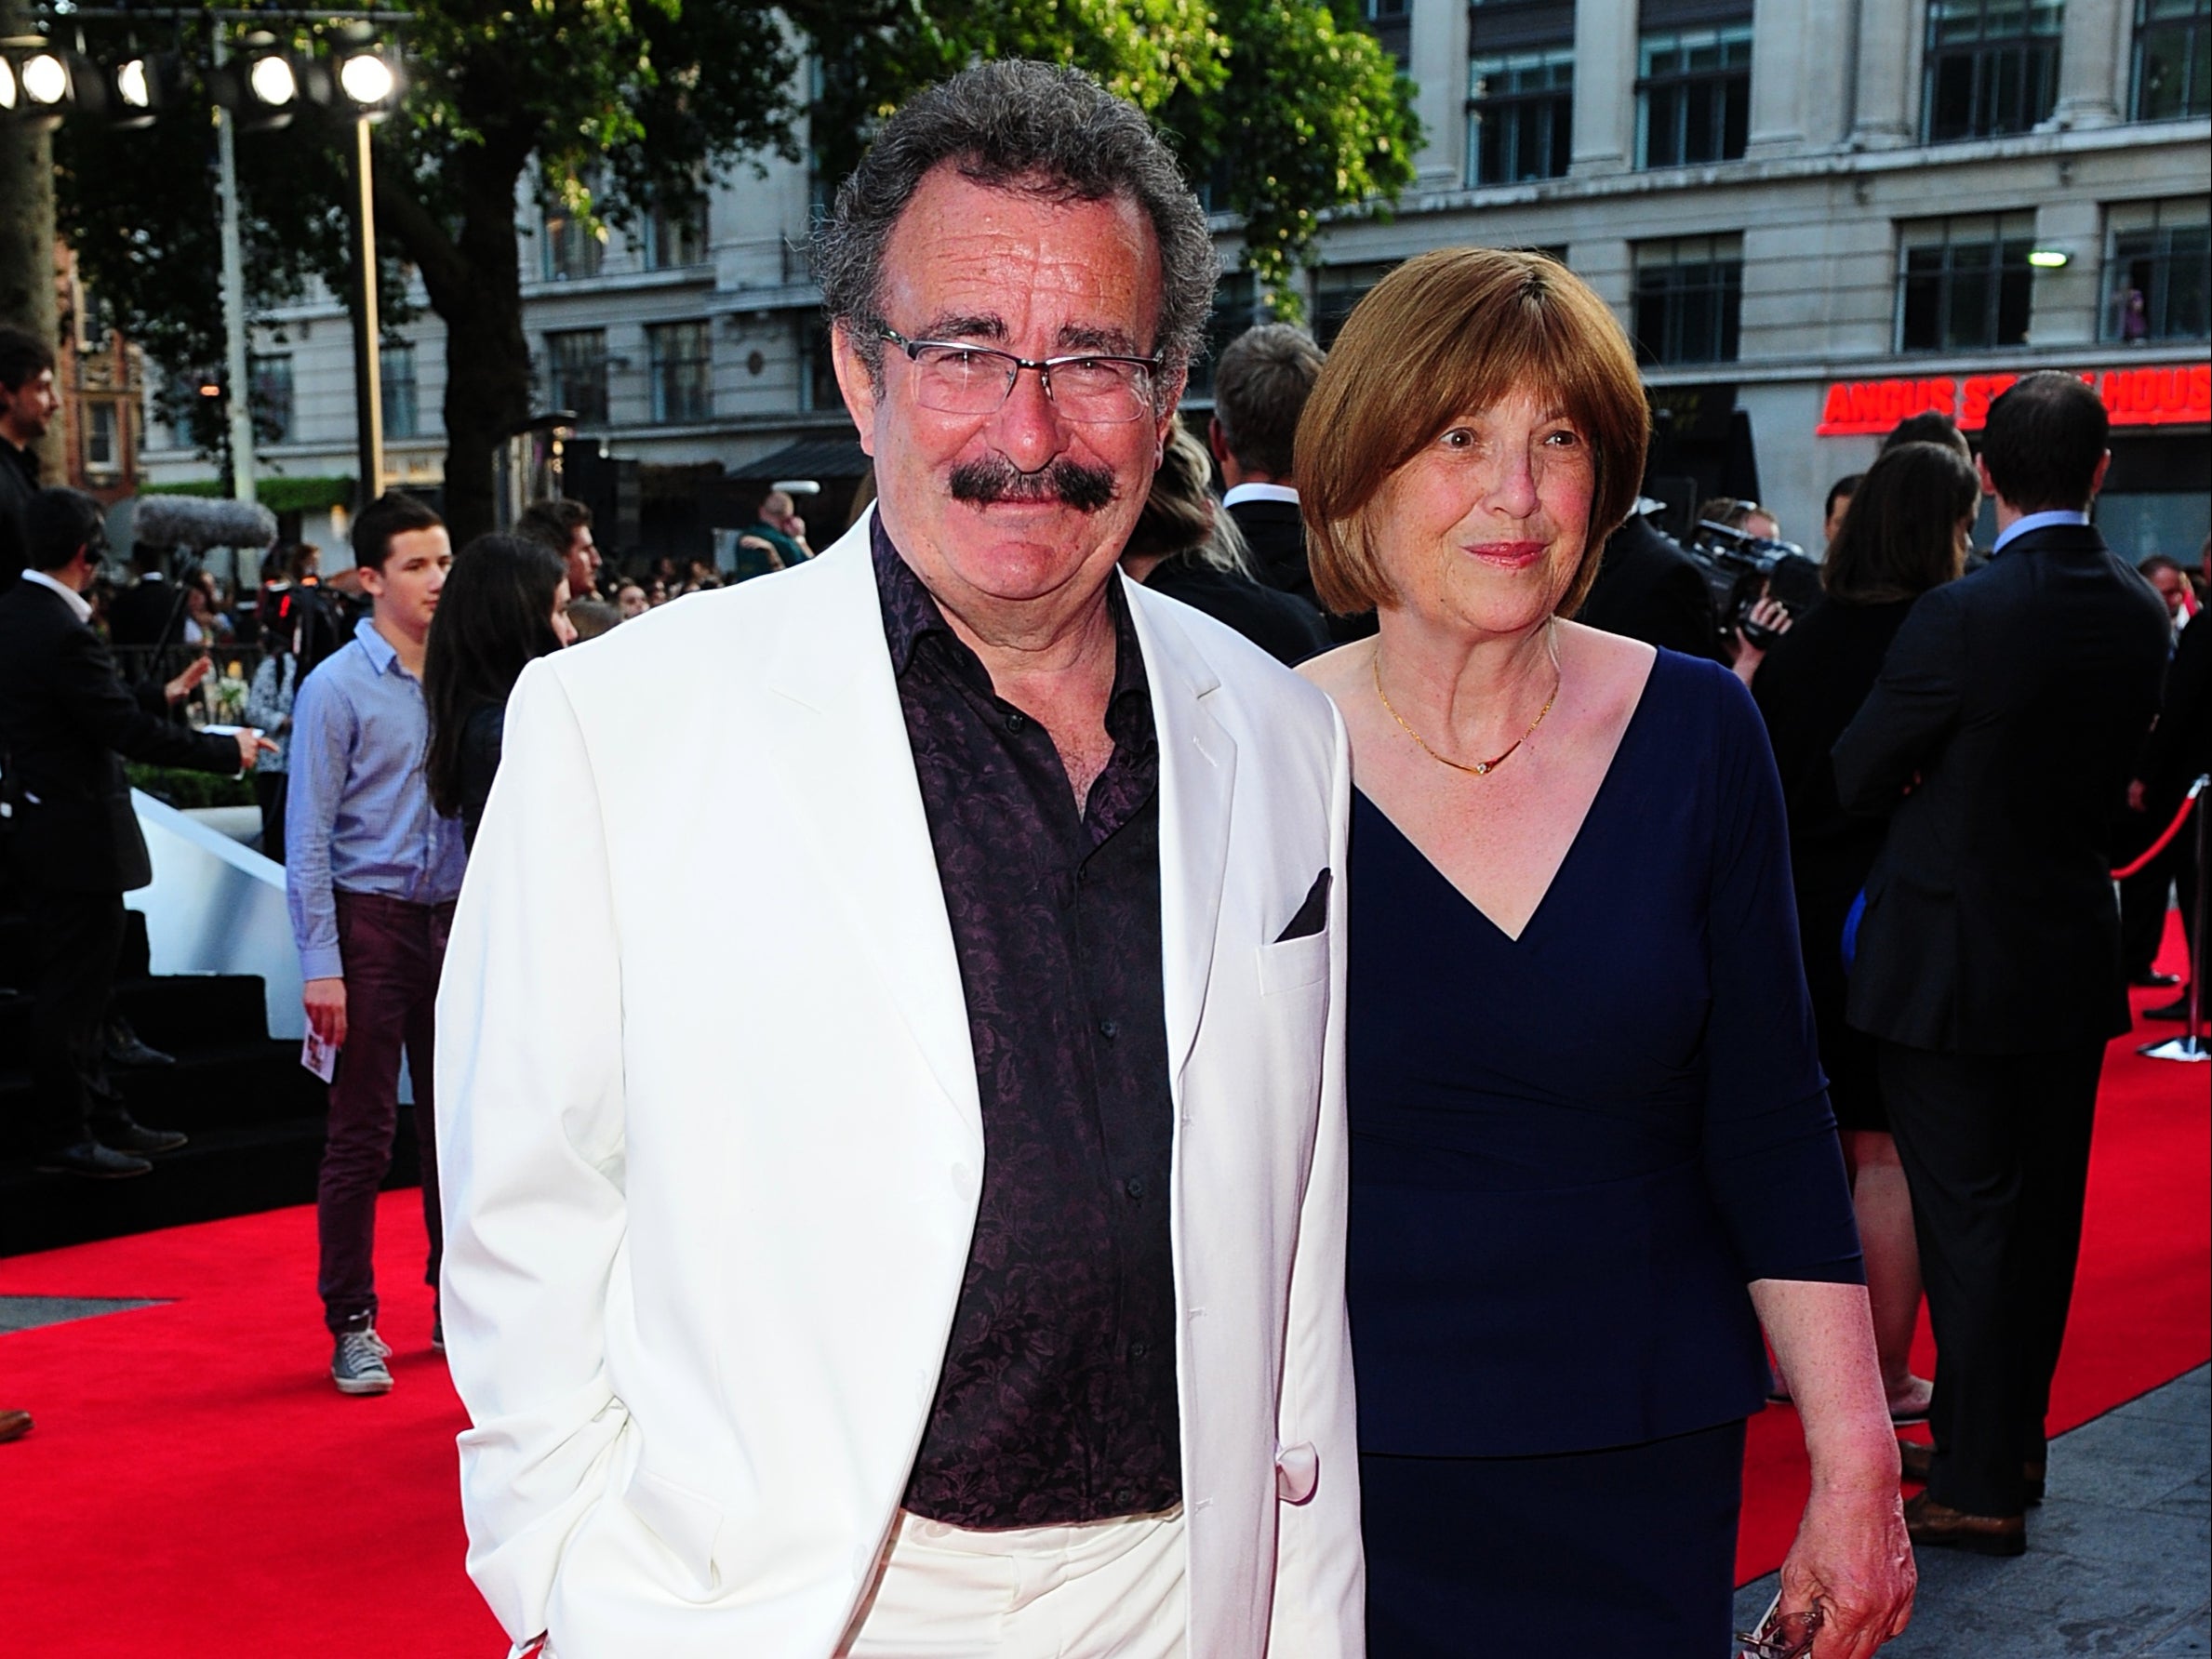 Lord Winston of Hammersmith, said people cannot change their sex because it is “genetically determined”